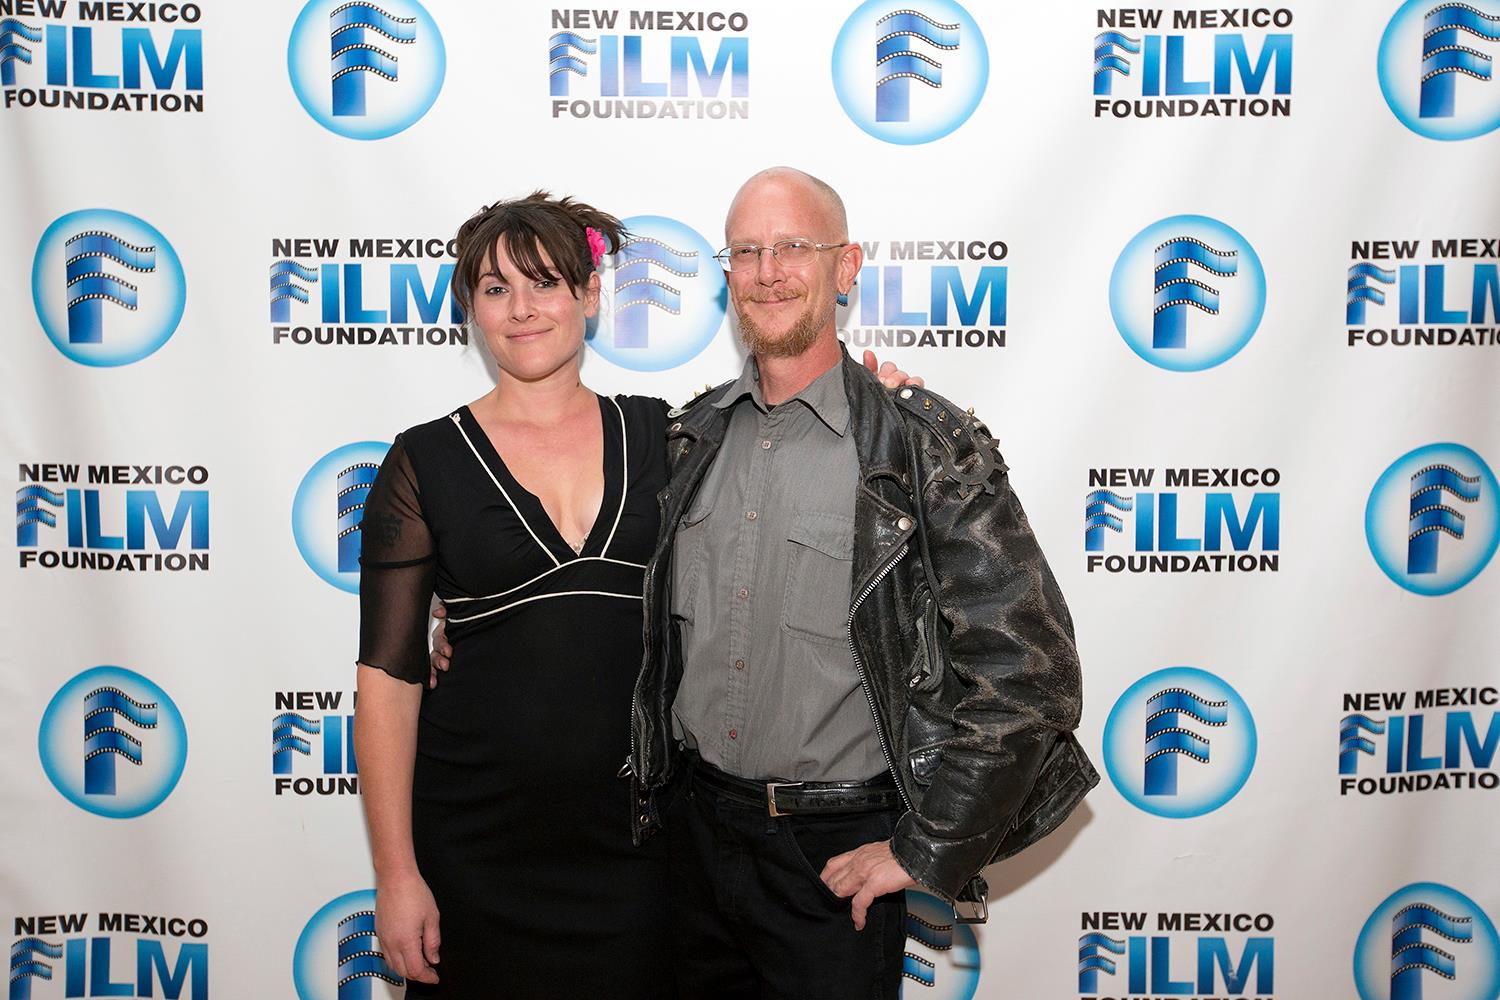 Recognition at the NM Film Foundation